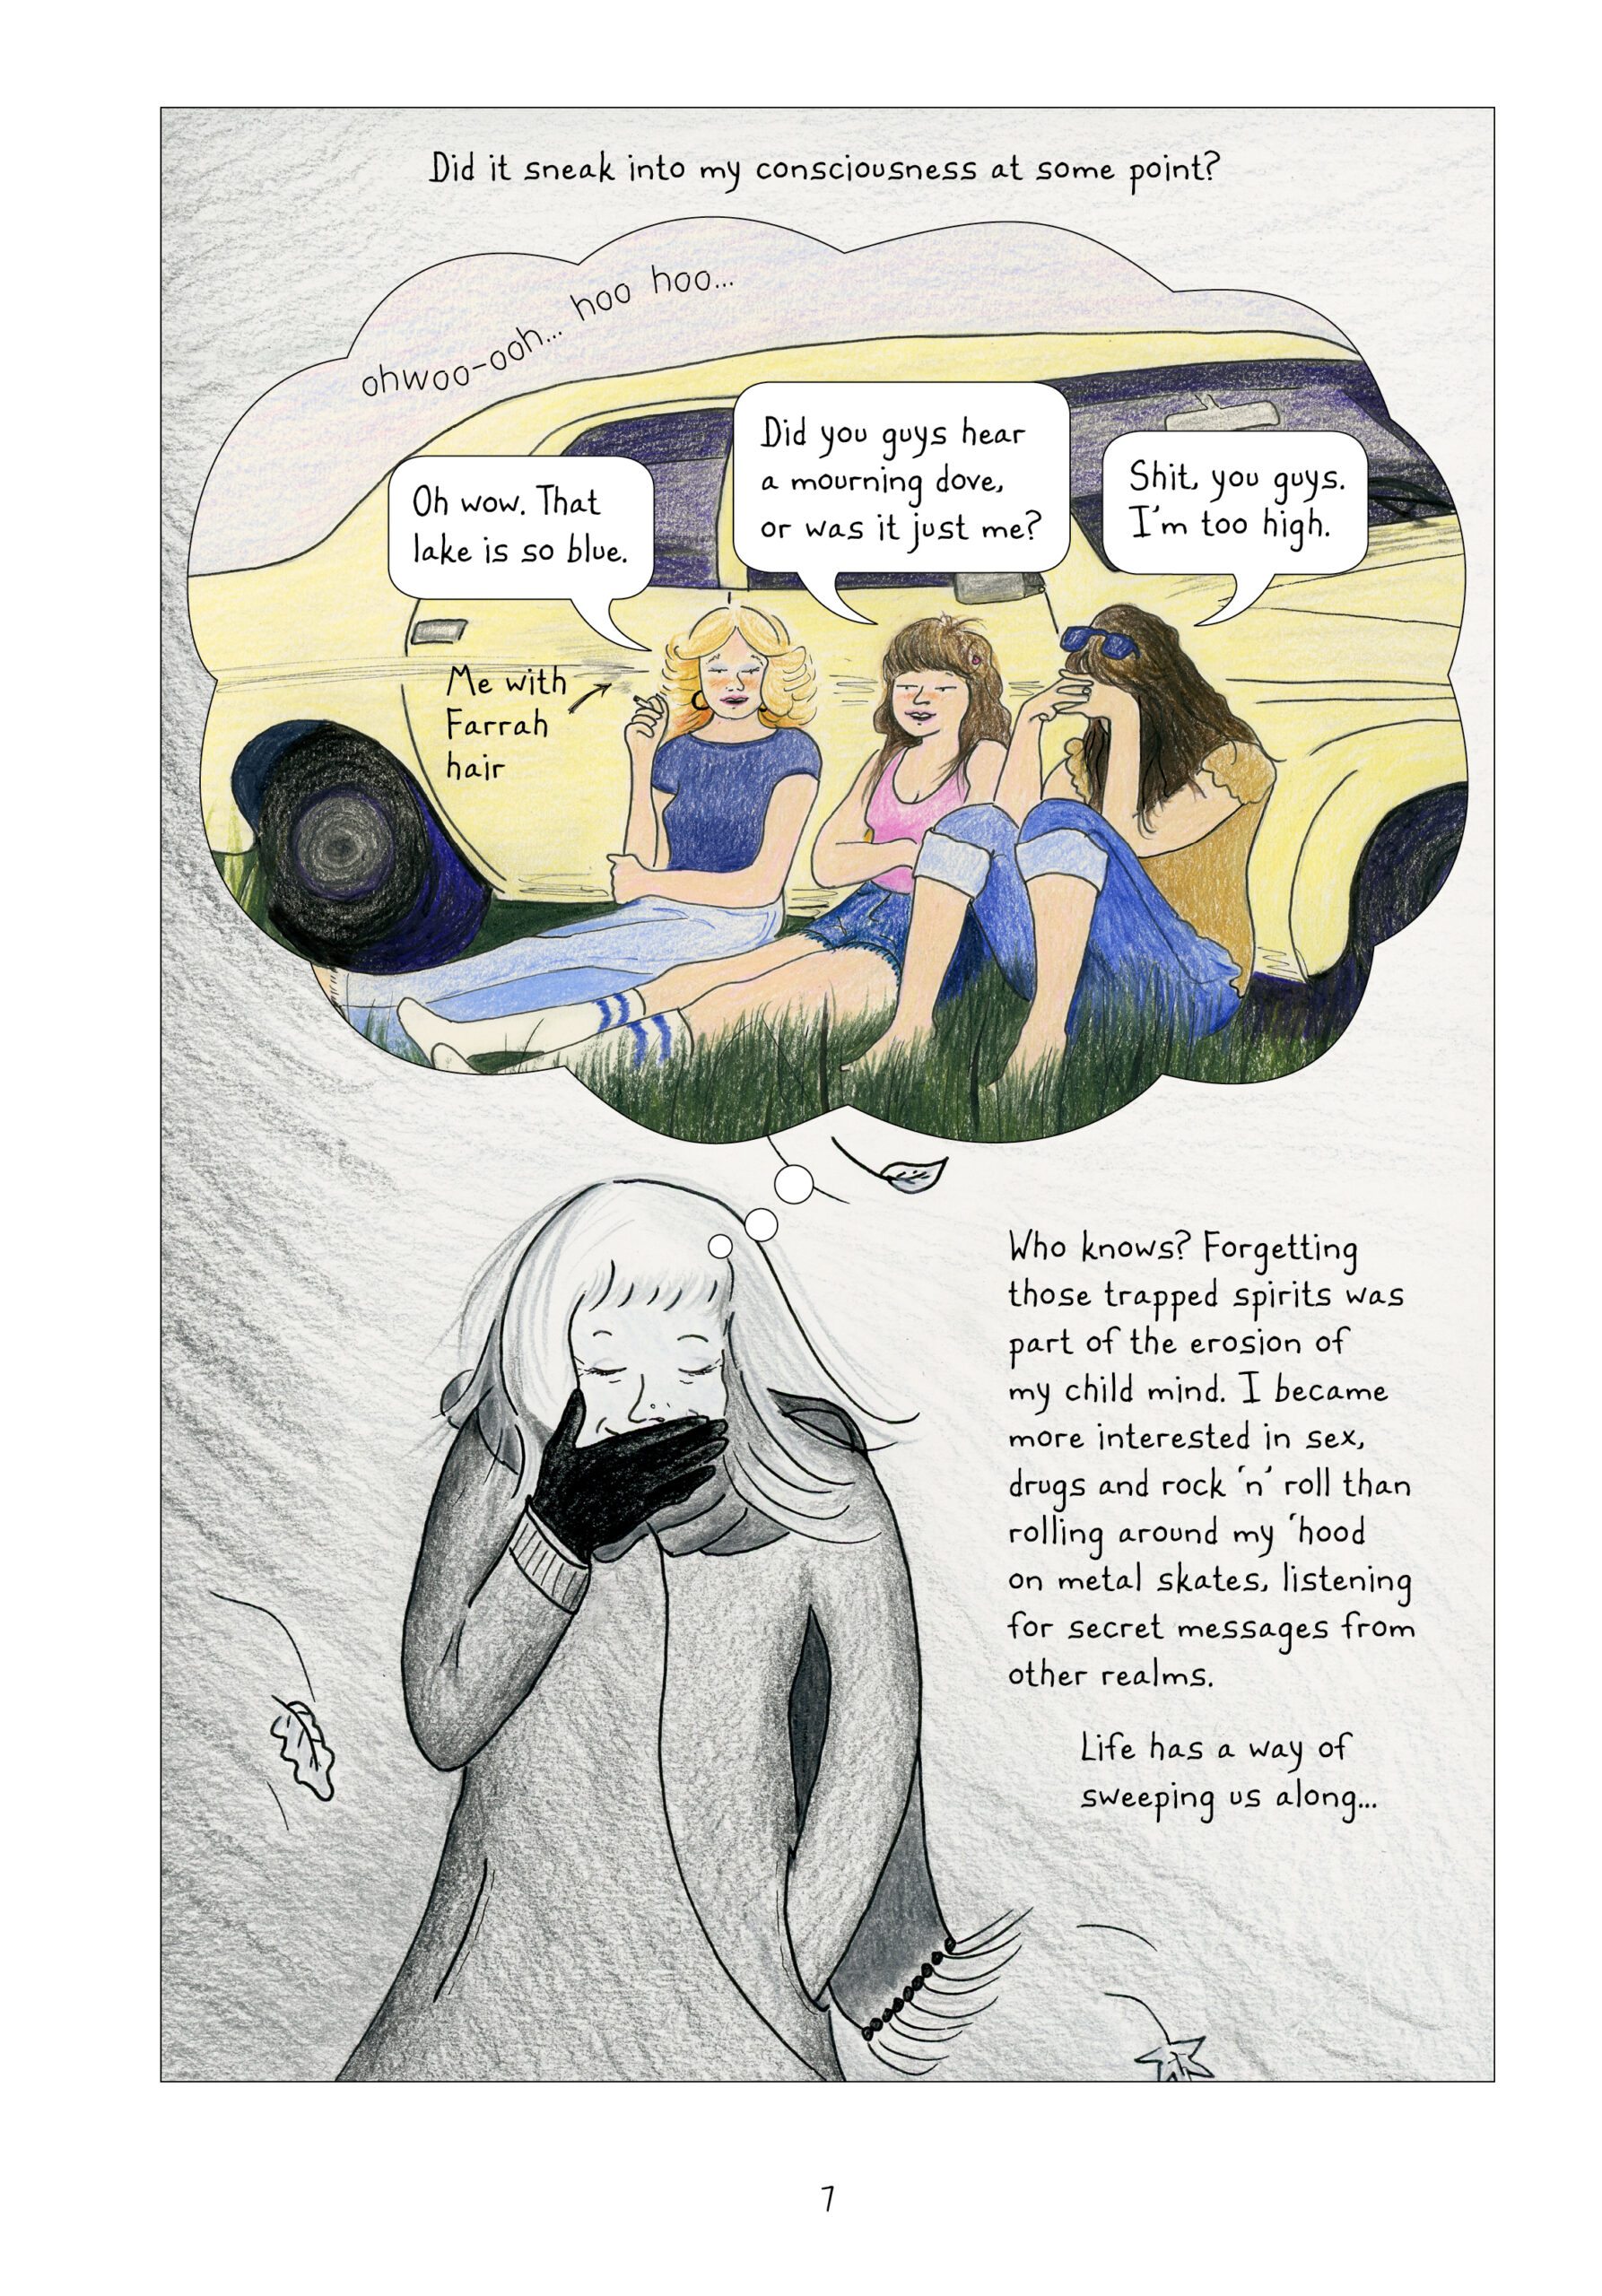 Lynn reflects on when the wonders of her child's mind gave way to adult concerns like drugs, sex, and rock 'n' roll. 
Lynn (adult, black and white) laughs to herself as she imagines a scene from her young adult years, depicted in a full-color thought bubble in which a younger Lynn with Farrah hair sits against a car with two friends. They are smoking. One comments on a mourning dove in the distance, but Lynn is perhaps too high to notice or care.